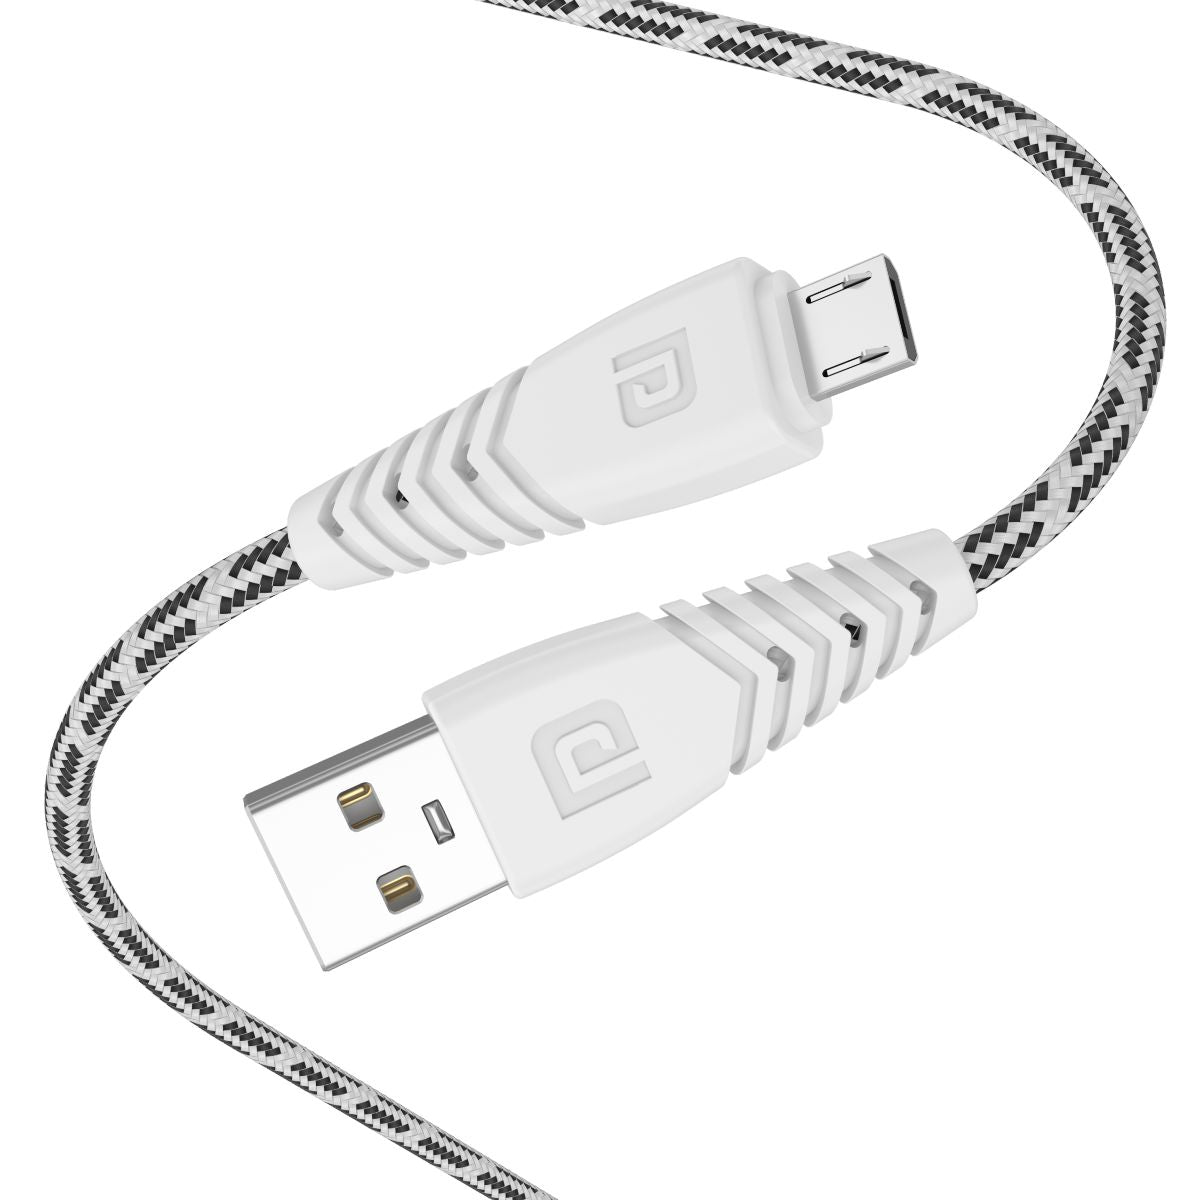 Buy Portronics Konnect Spydr Micro USB Cable 4mm extra thick